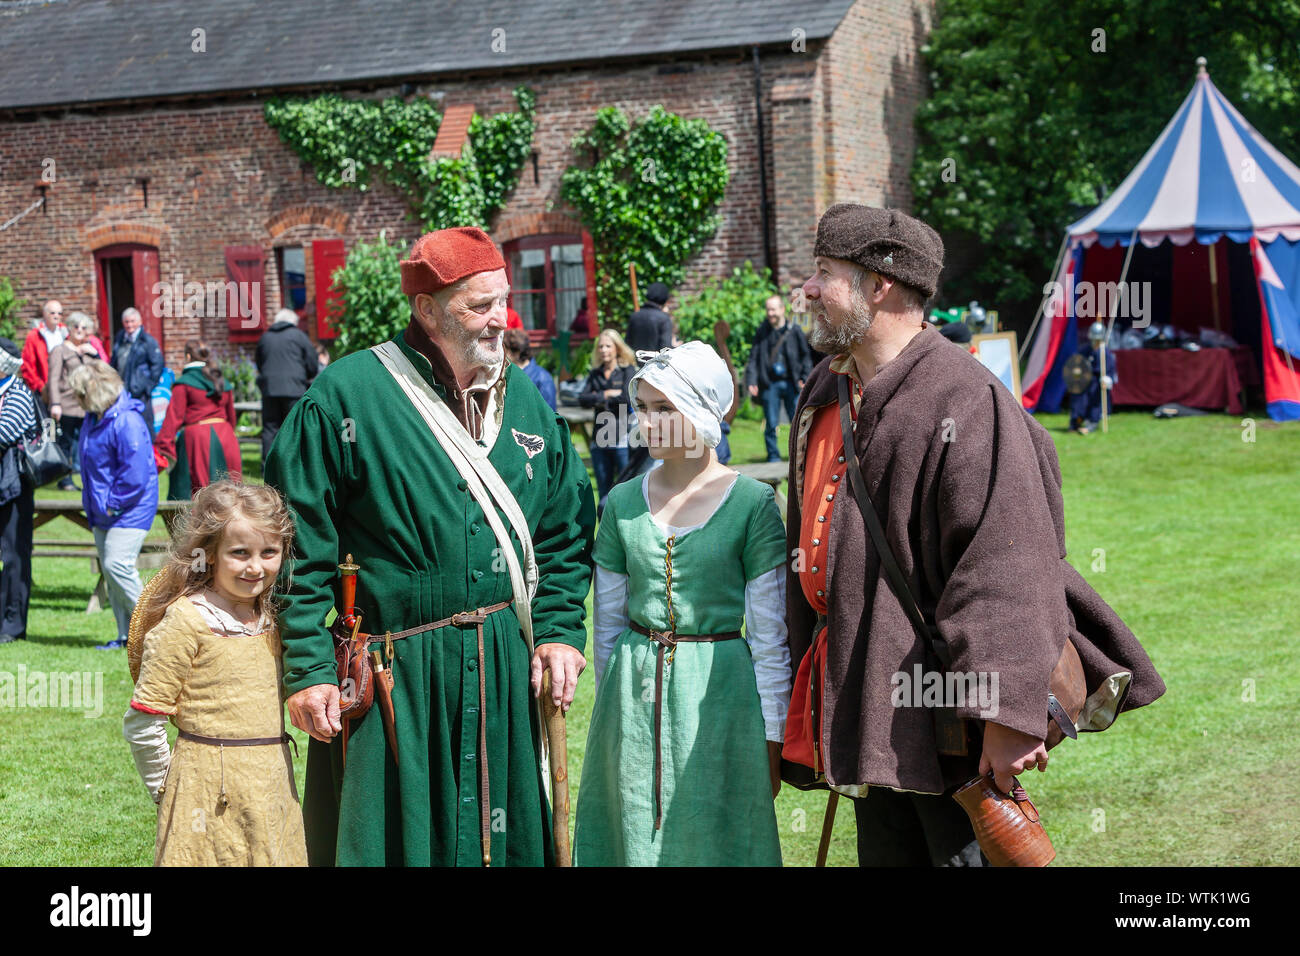 A group of people in medieval costume participants at The Medieval Fayre in Tatton Park, Knutsford, Cheshire. Stock Photo